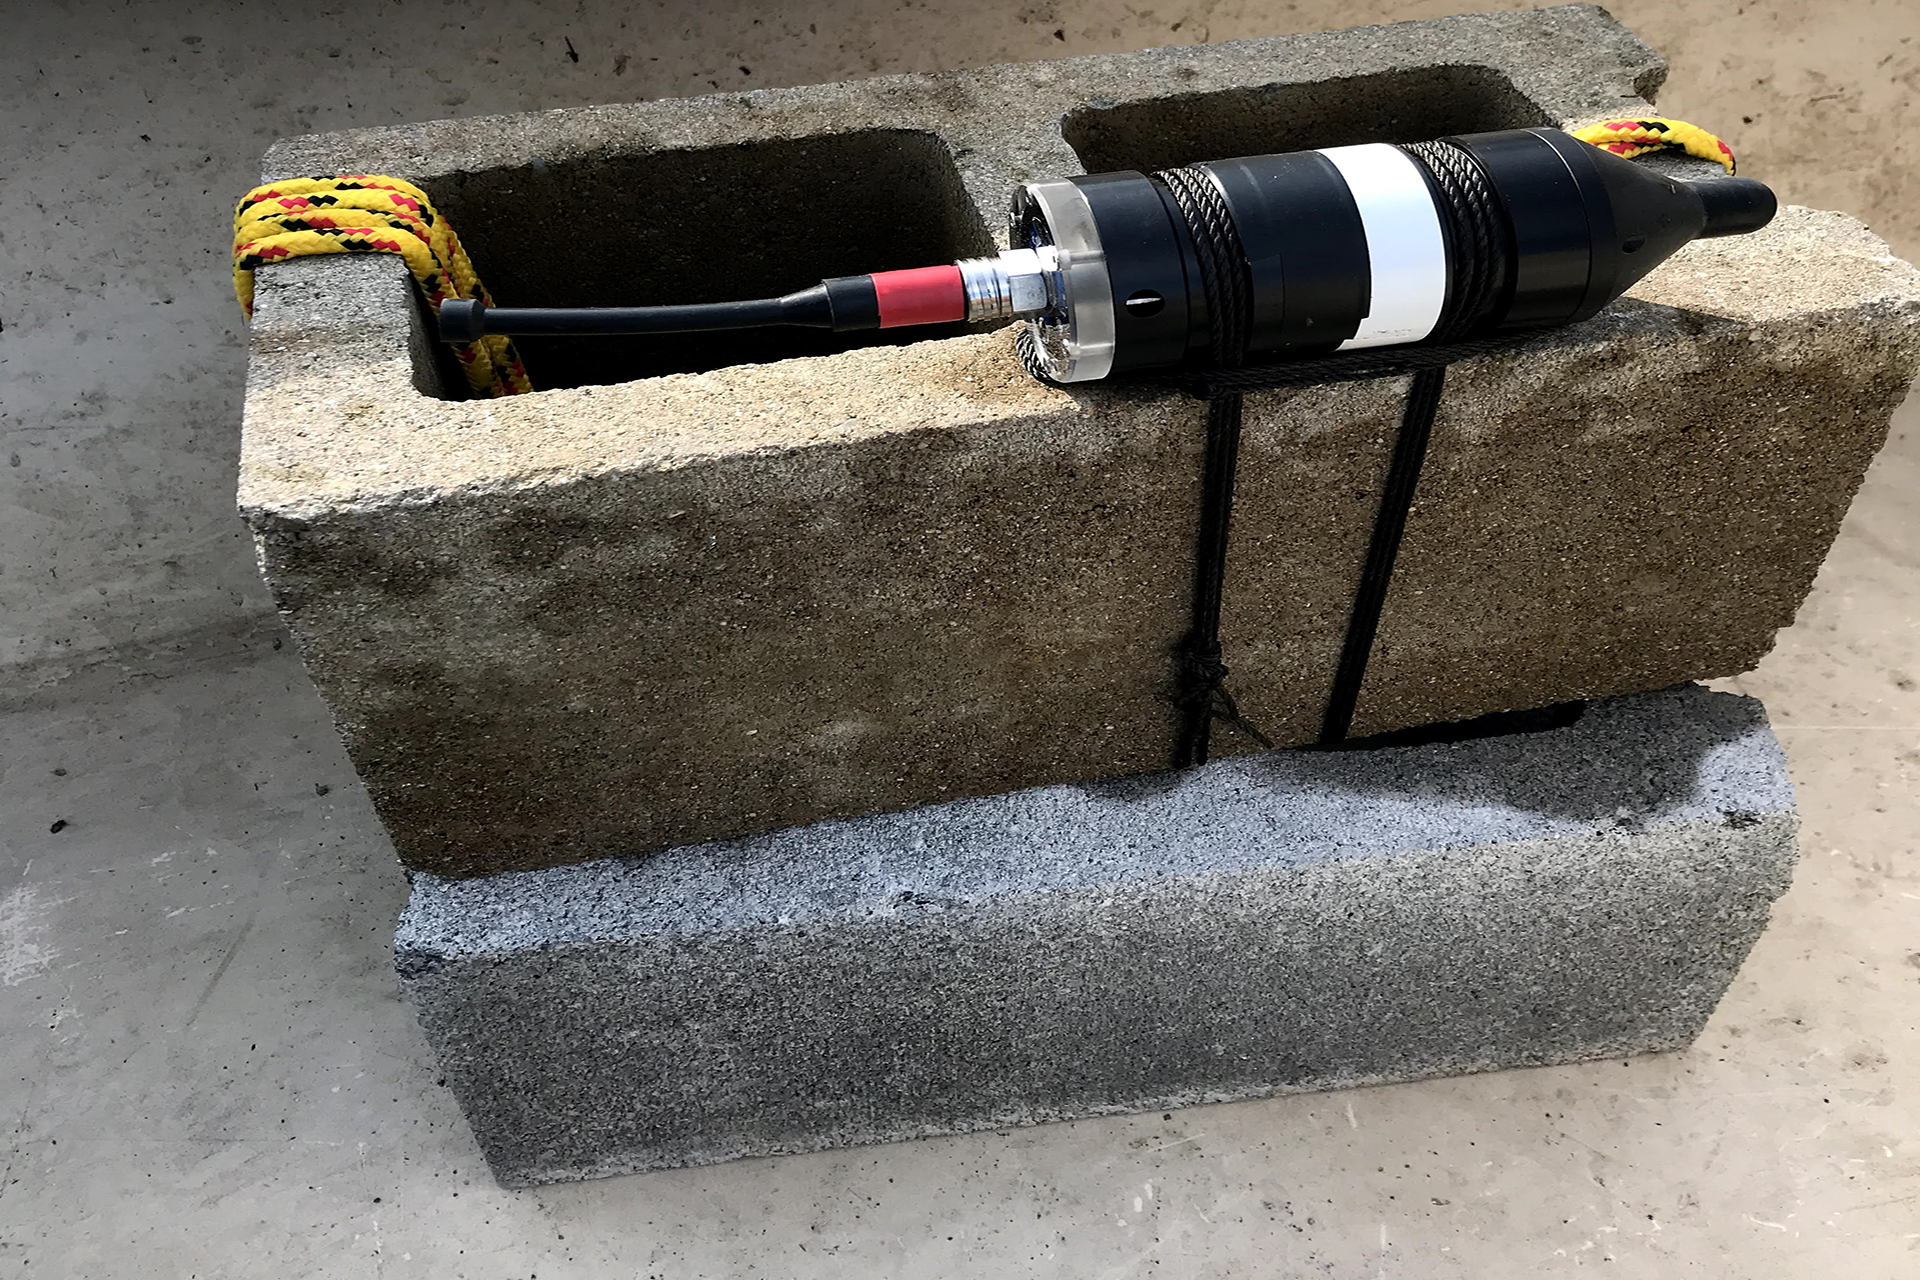 Acousting monitoring device attached to a cinder block 